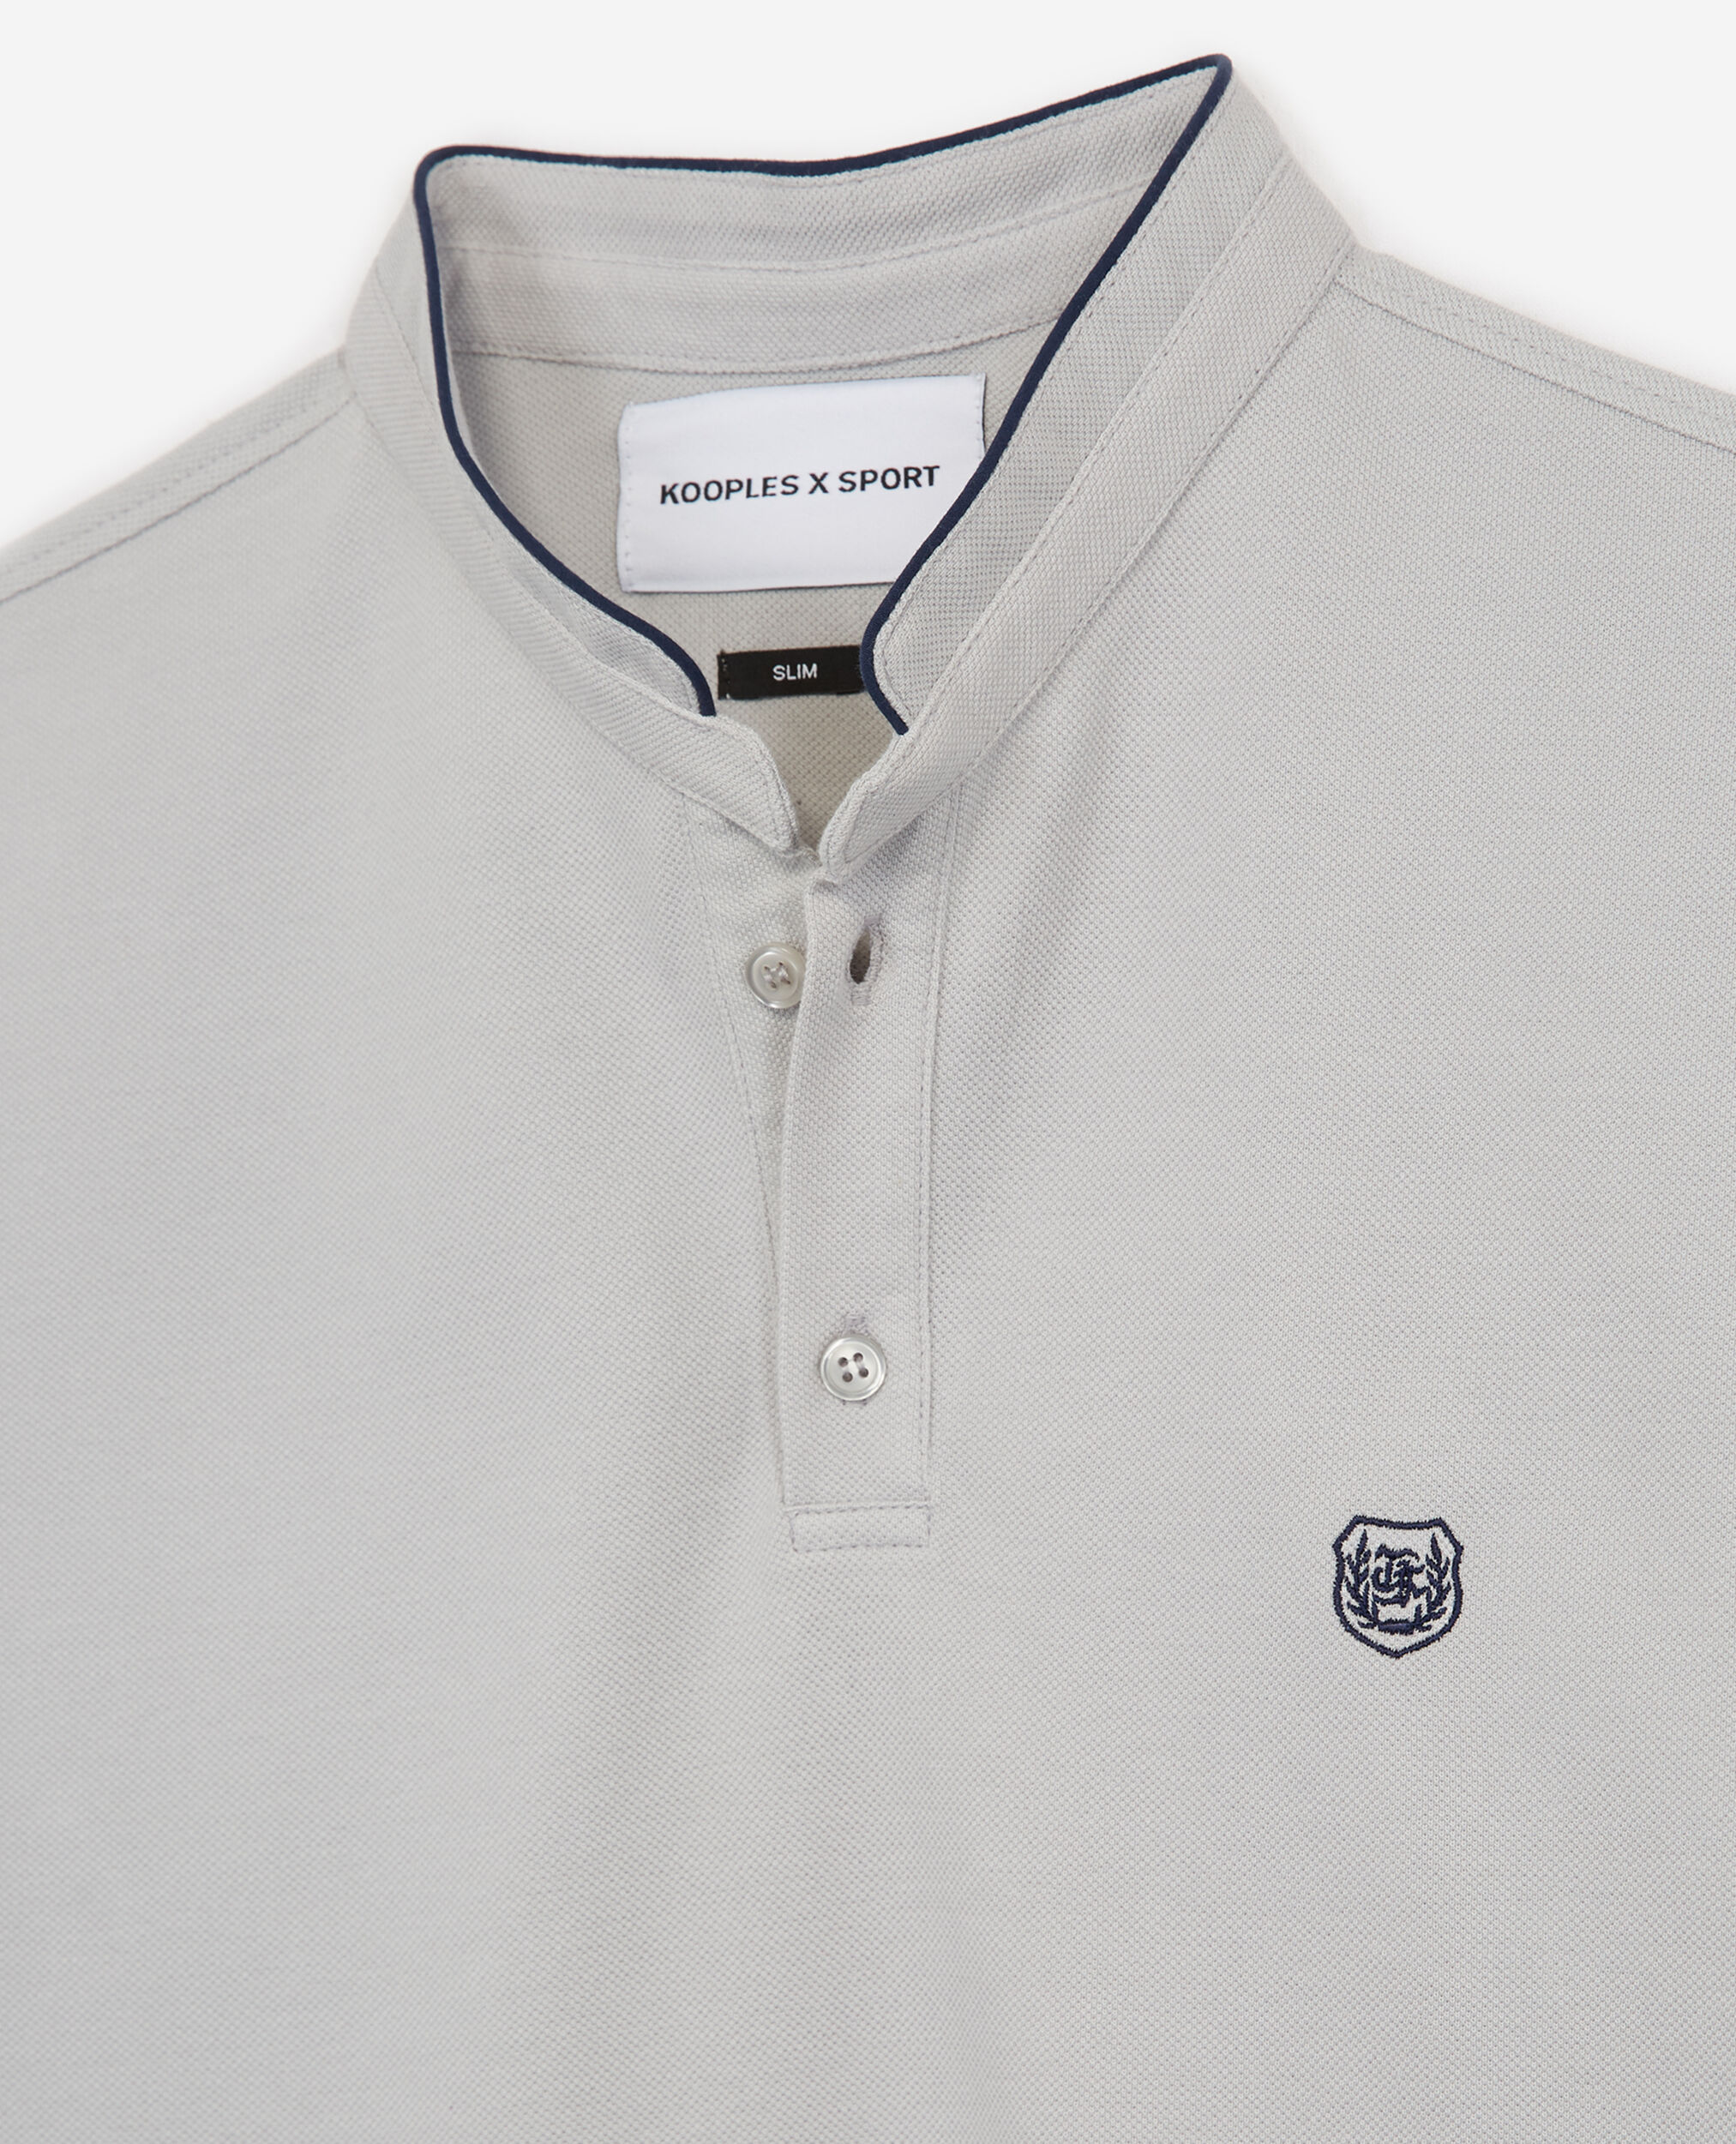 Grey polo with logo, HIGH RISE GRY / NIGHT BLU, hi-res image number null